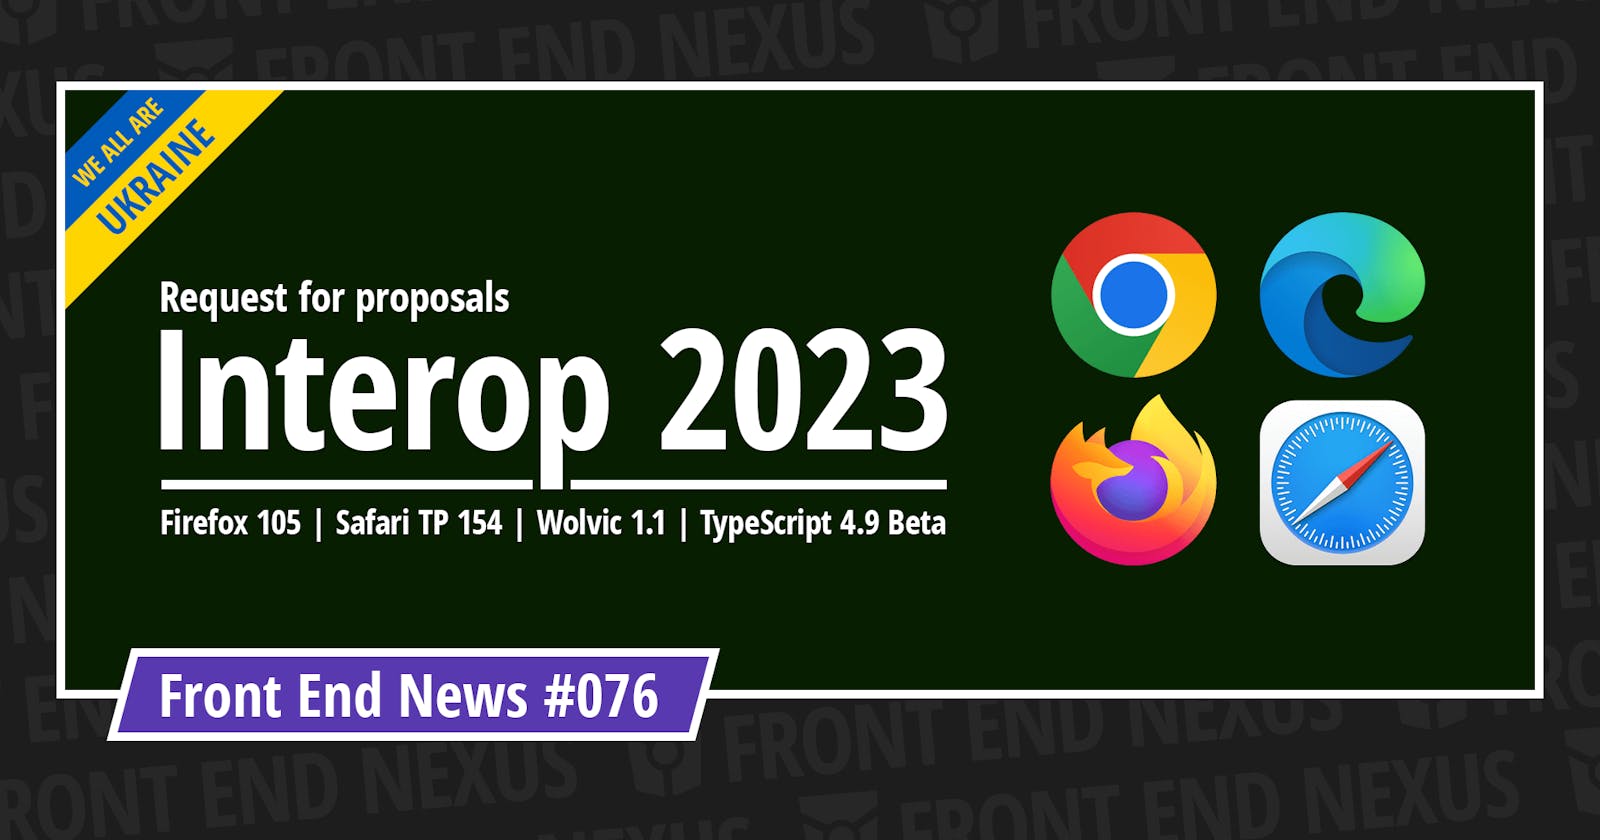 Proposals for Interop 2023, Firefox 105, Safari TP 154, Wolvic 1.1, TypeScript 4.9 Beta, and more | Front End News #076